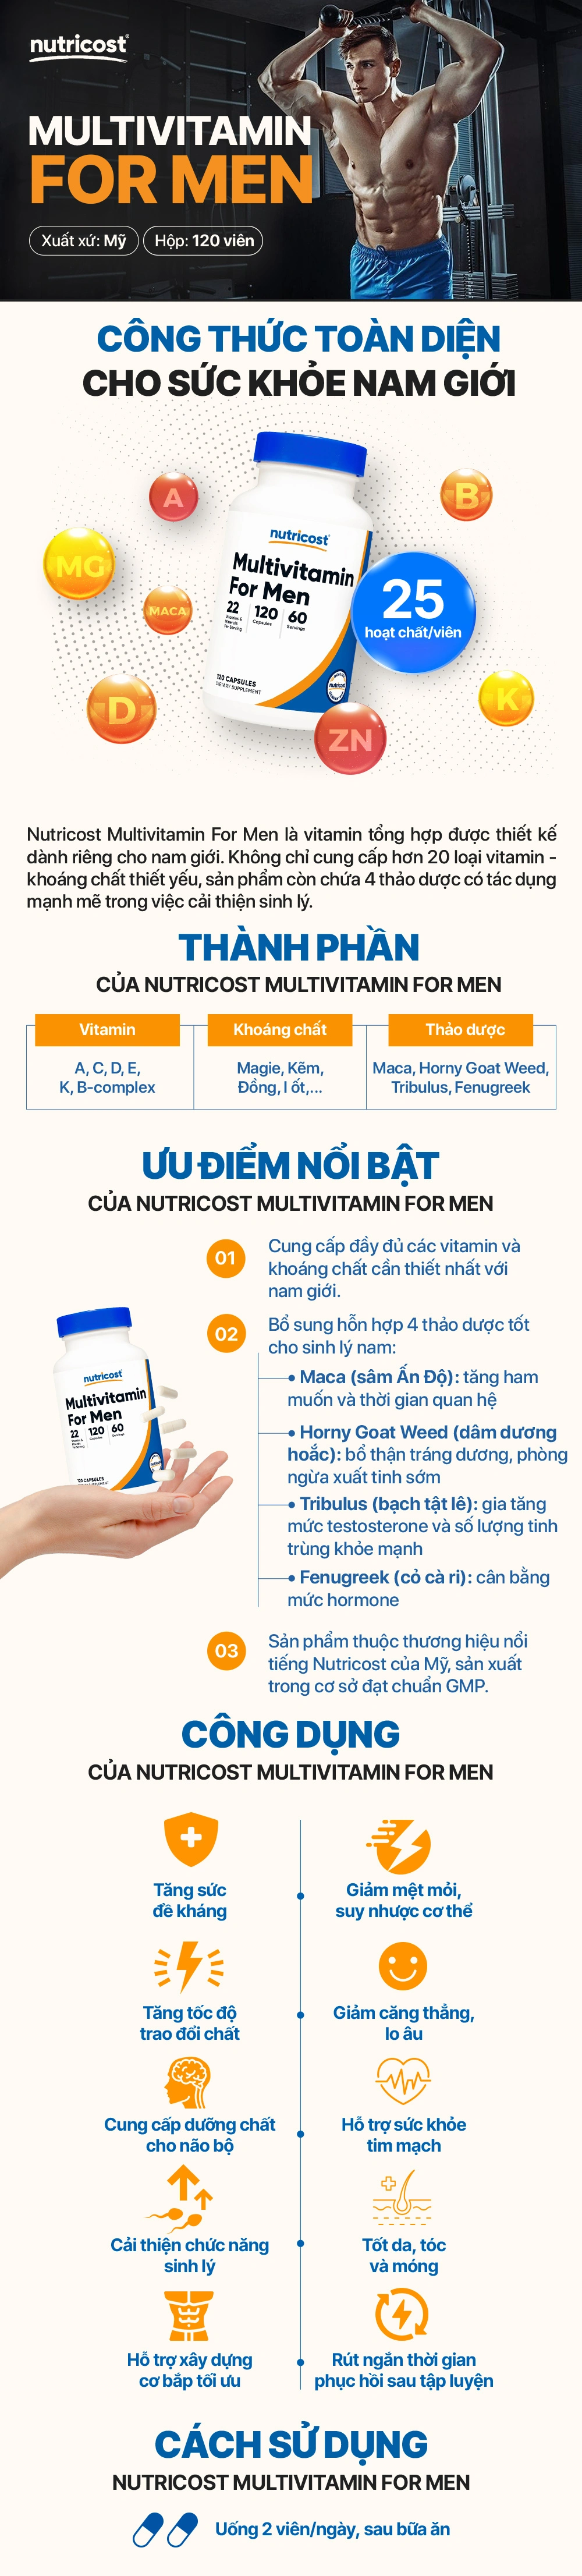 nutricost-multivitamin-for-men-tang-cuong-suc-khoe-gymstore